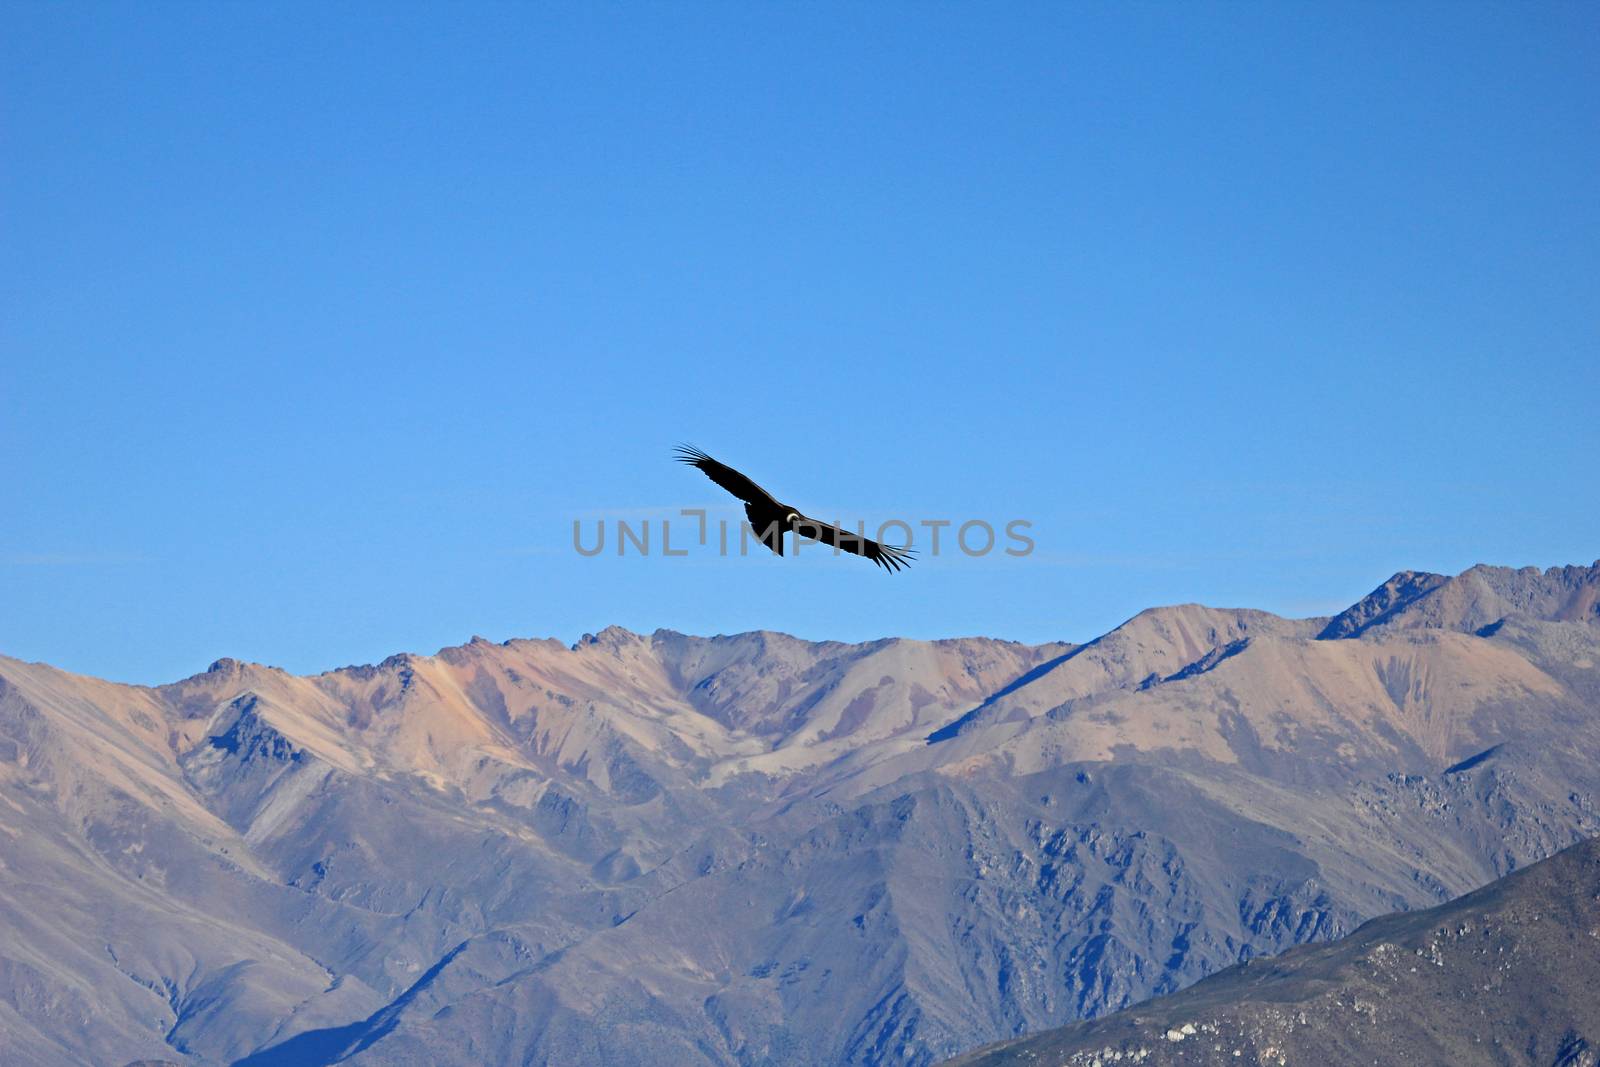 A female adult andean condor flying over the mountains of Colca canyon - one of the deepest canyons in the world, near the city of Arequipa in Peru.